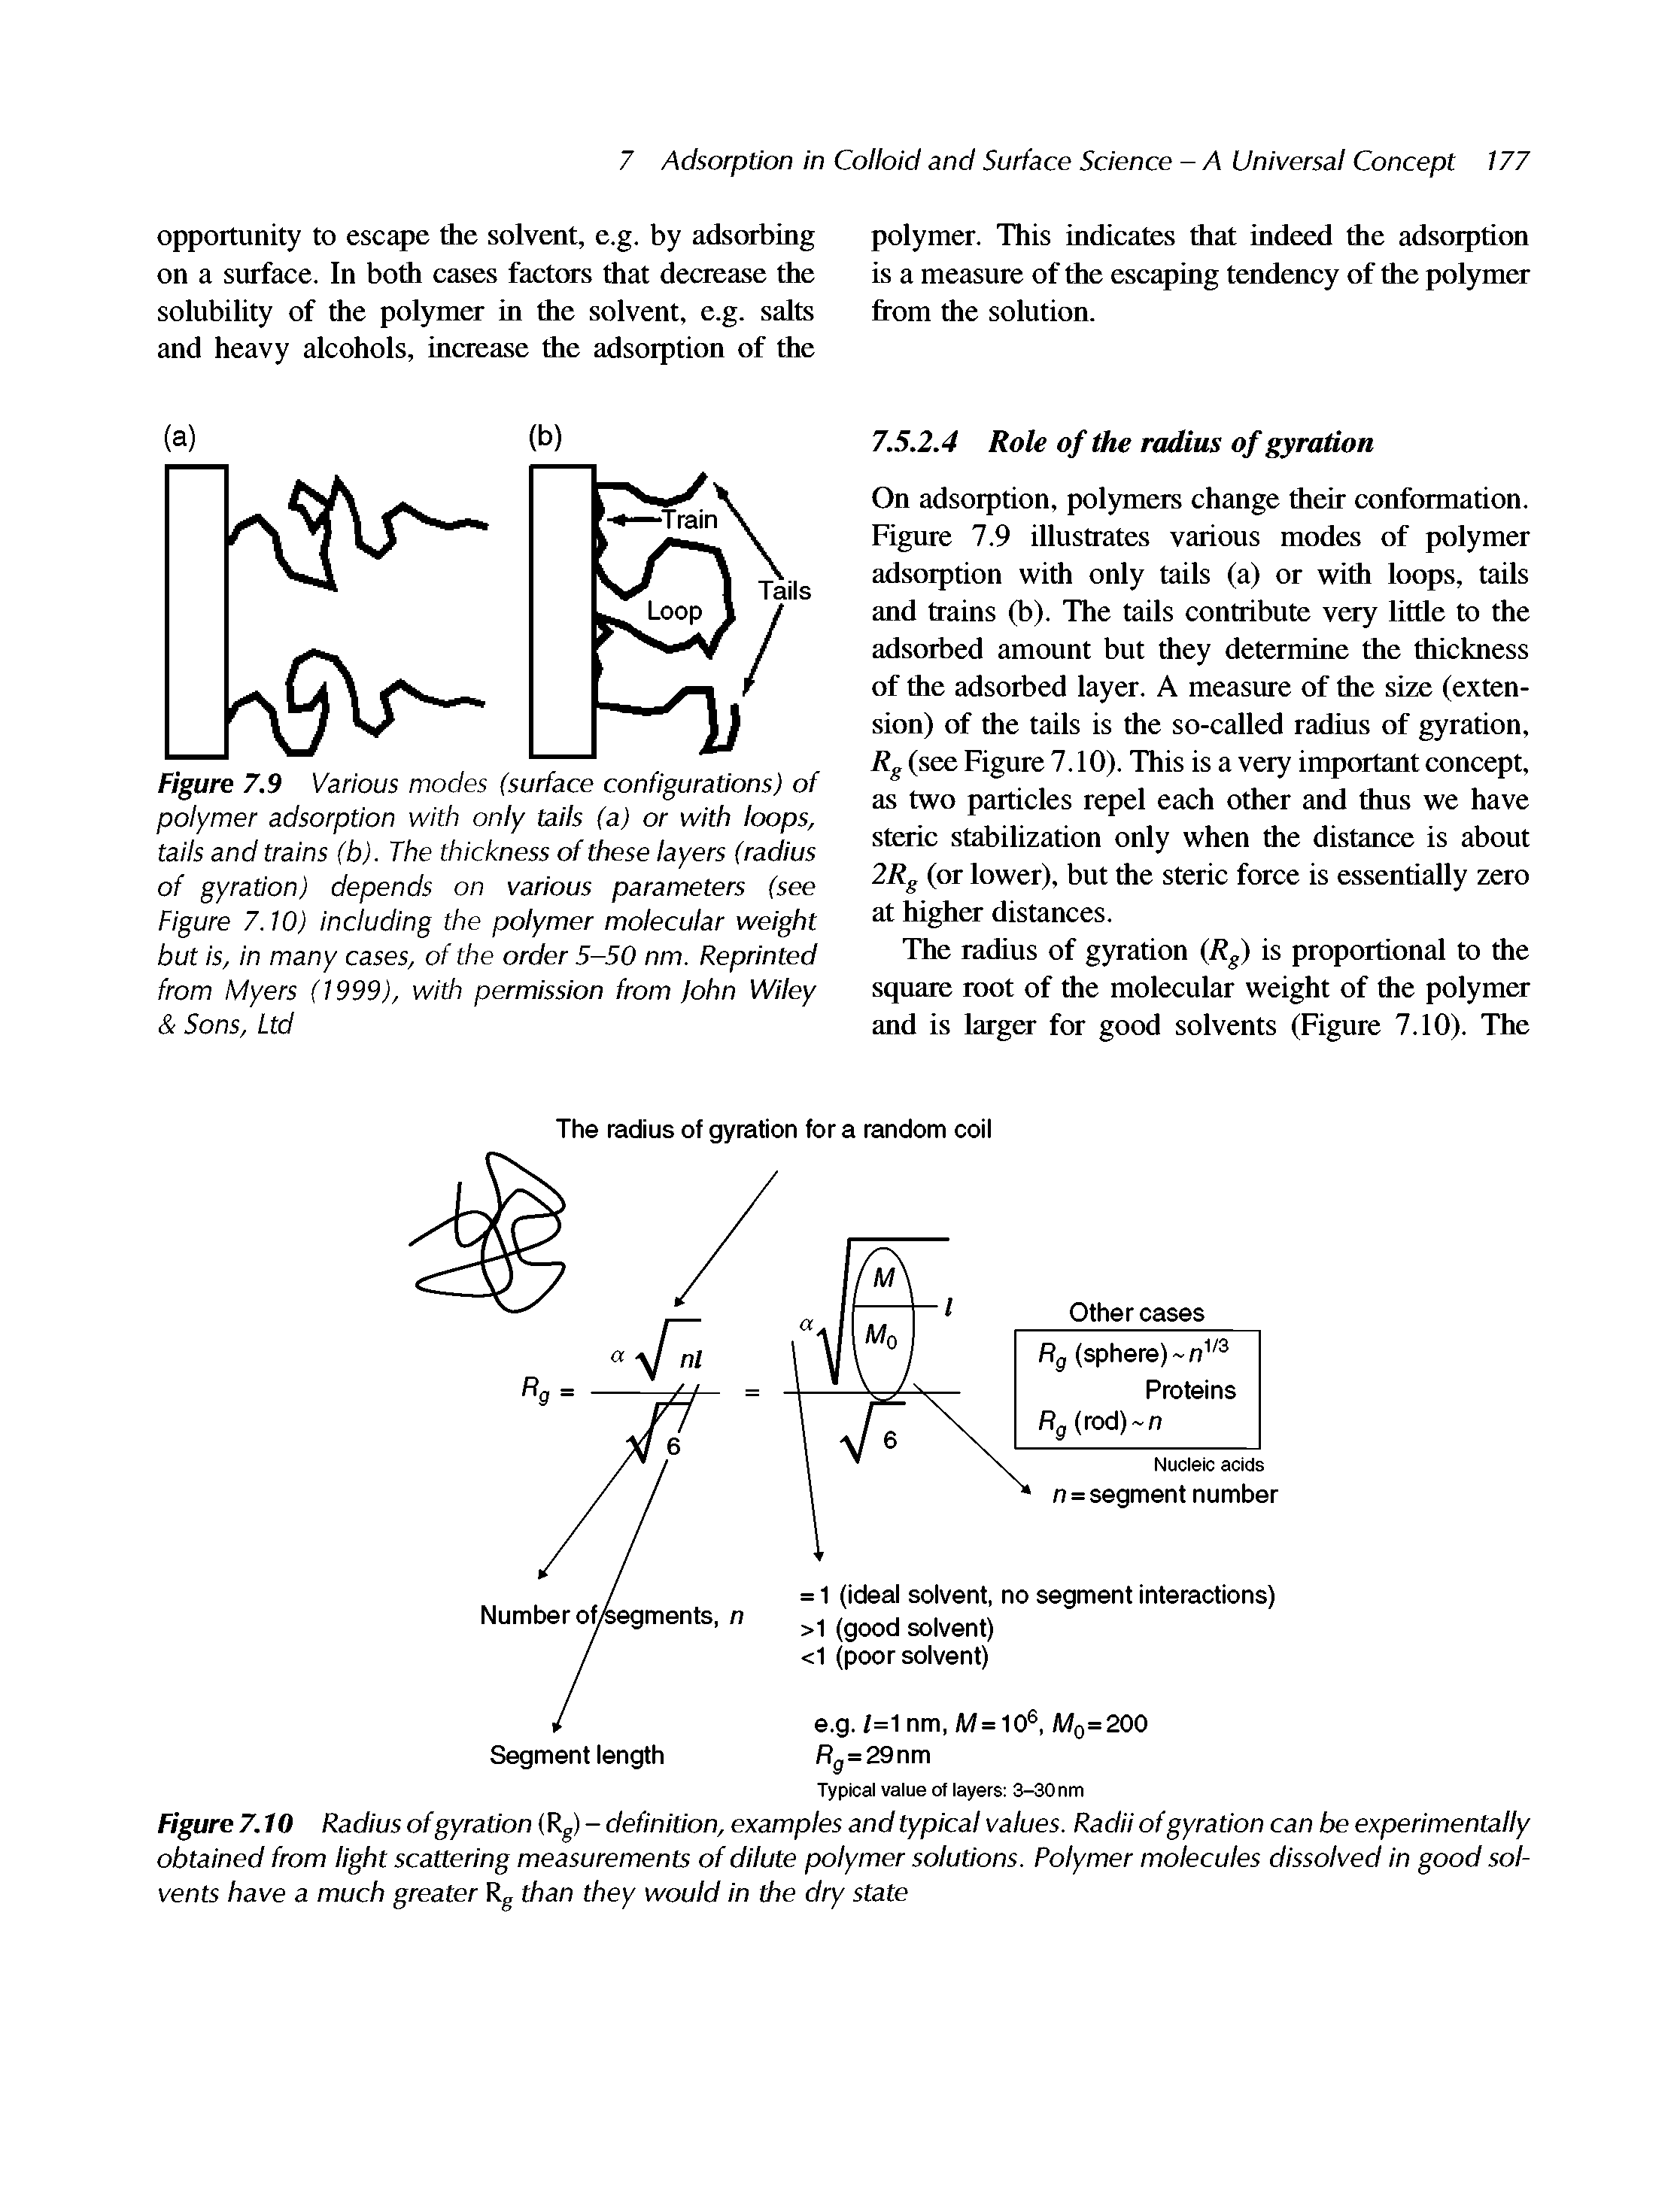 Figure 7.10 Radius of gyration (Rg) - definition, examples and typical values. Radii of gyration can be experimentally obtained from light scattering measurements of dilute polymer solutions. Polymer molecules dissolved in good solvents have a much greater Rg than they would In the dry state...